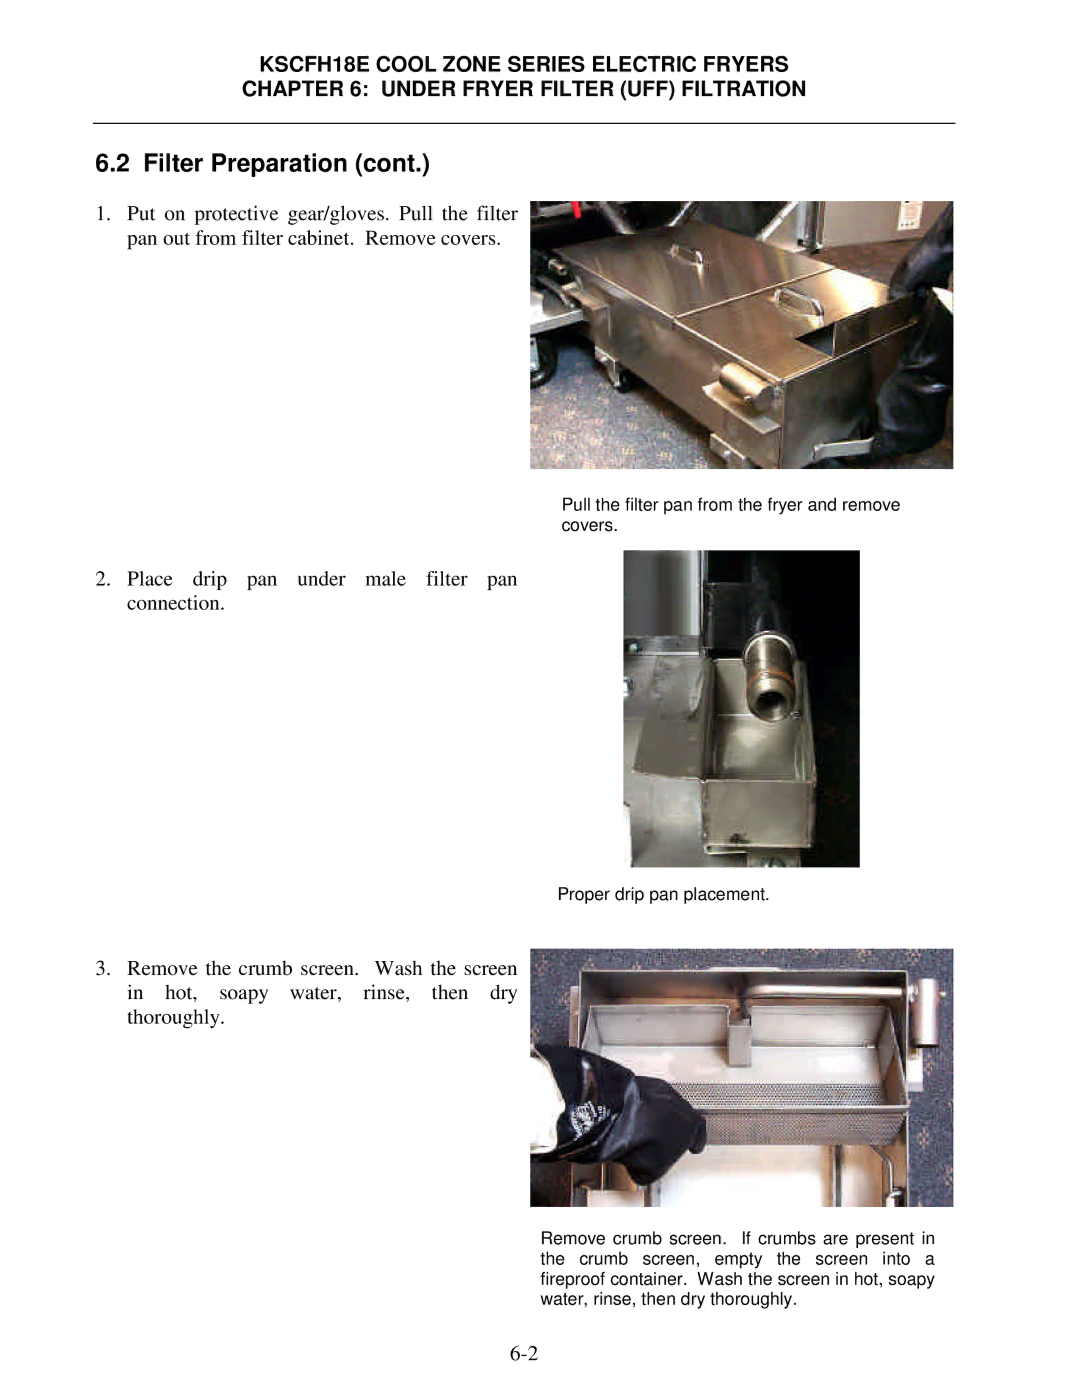 Frymaster KSCFH18E operation manual Place drip pan under male filter pan connection 